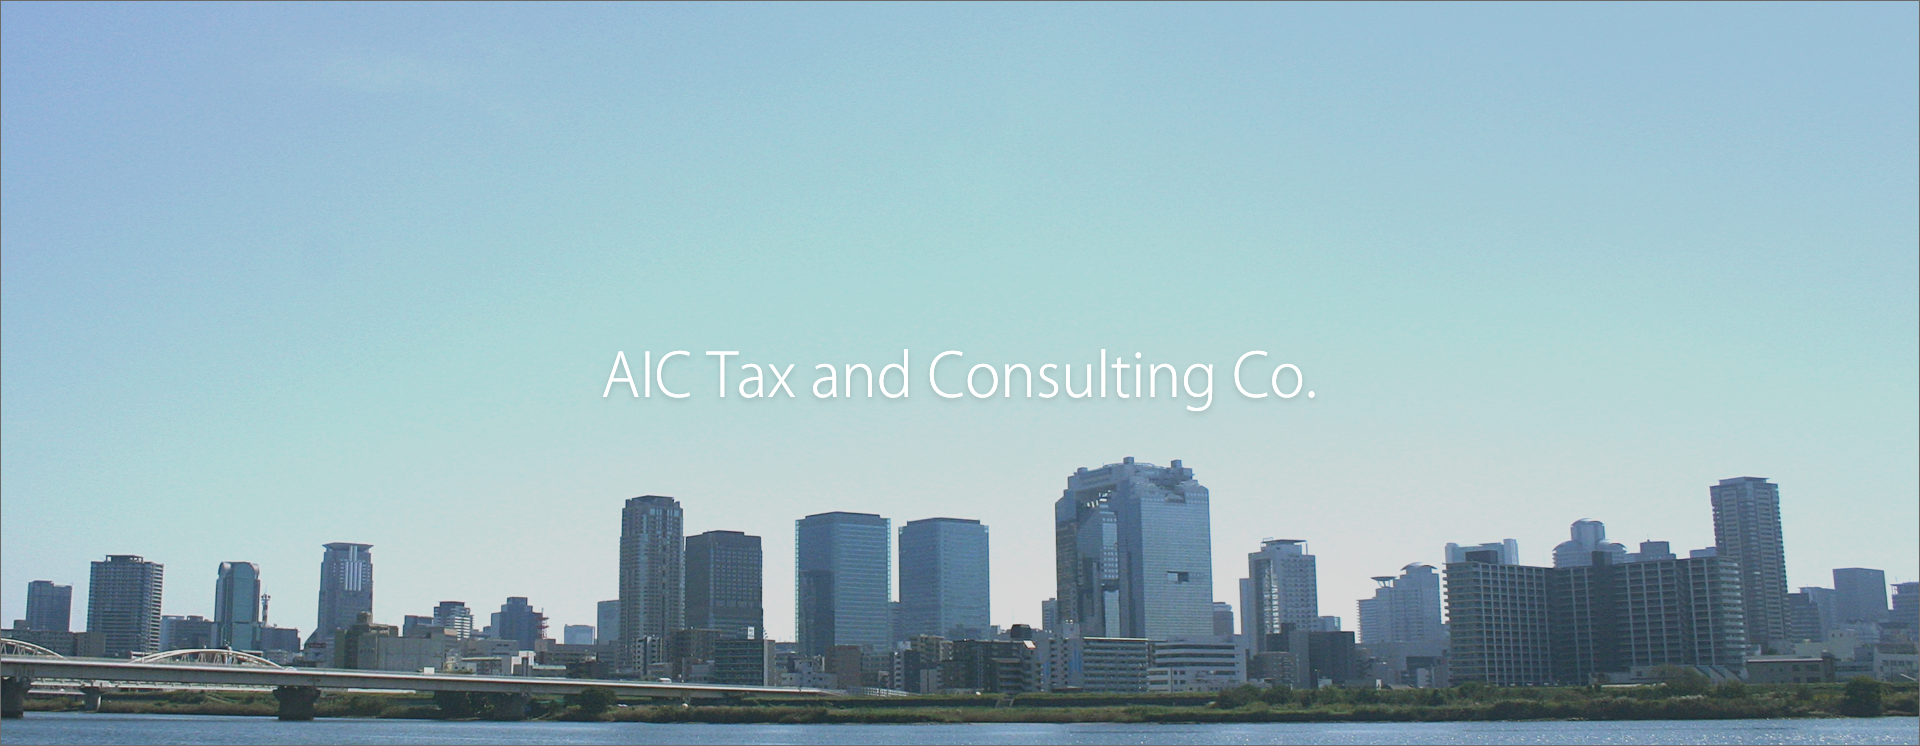 AIC Tax and Consulting Co.